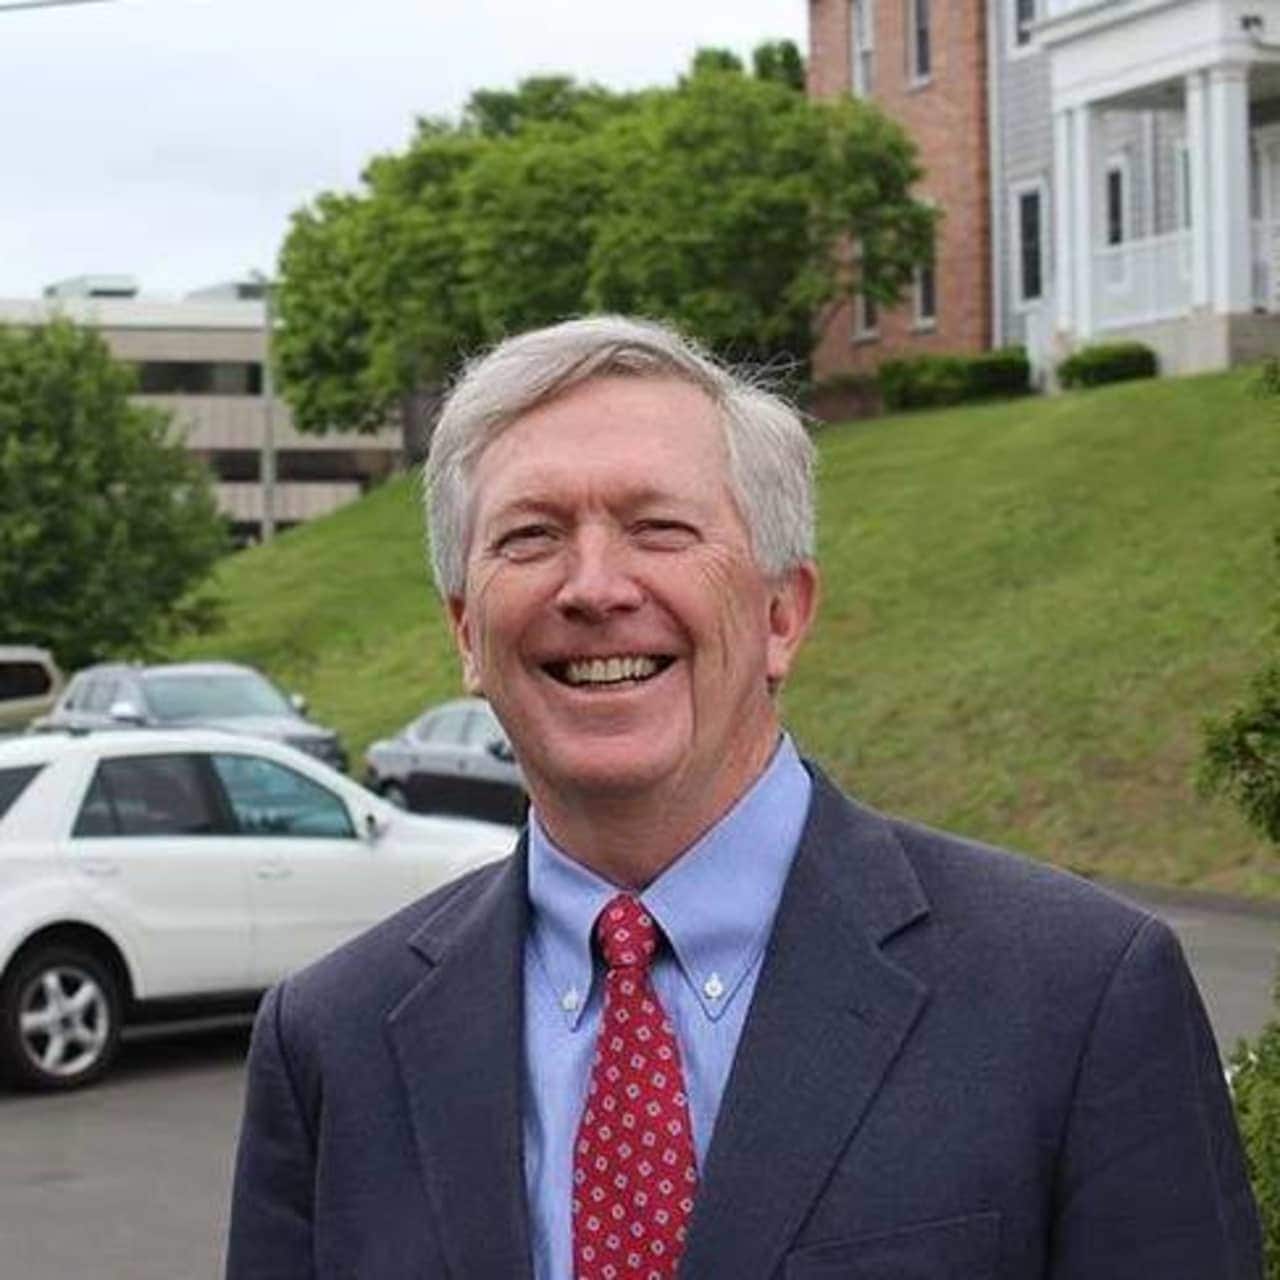 Kevin Moynihan was elected First Selectman of New Canaan on Tuesday.